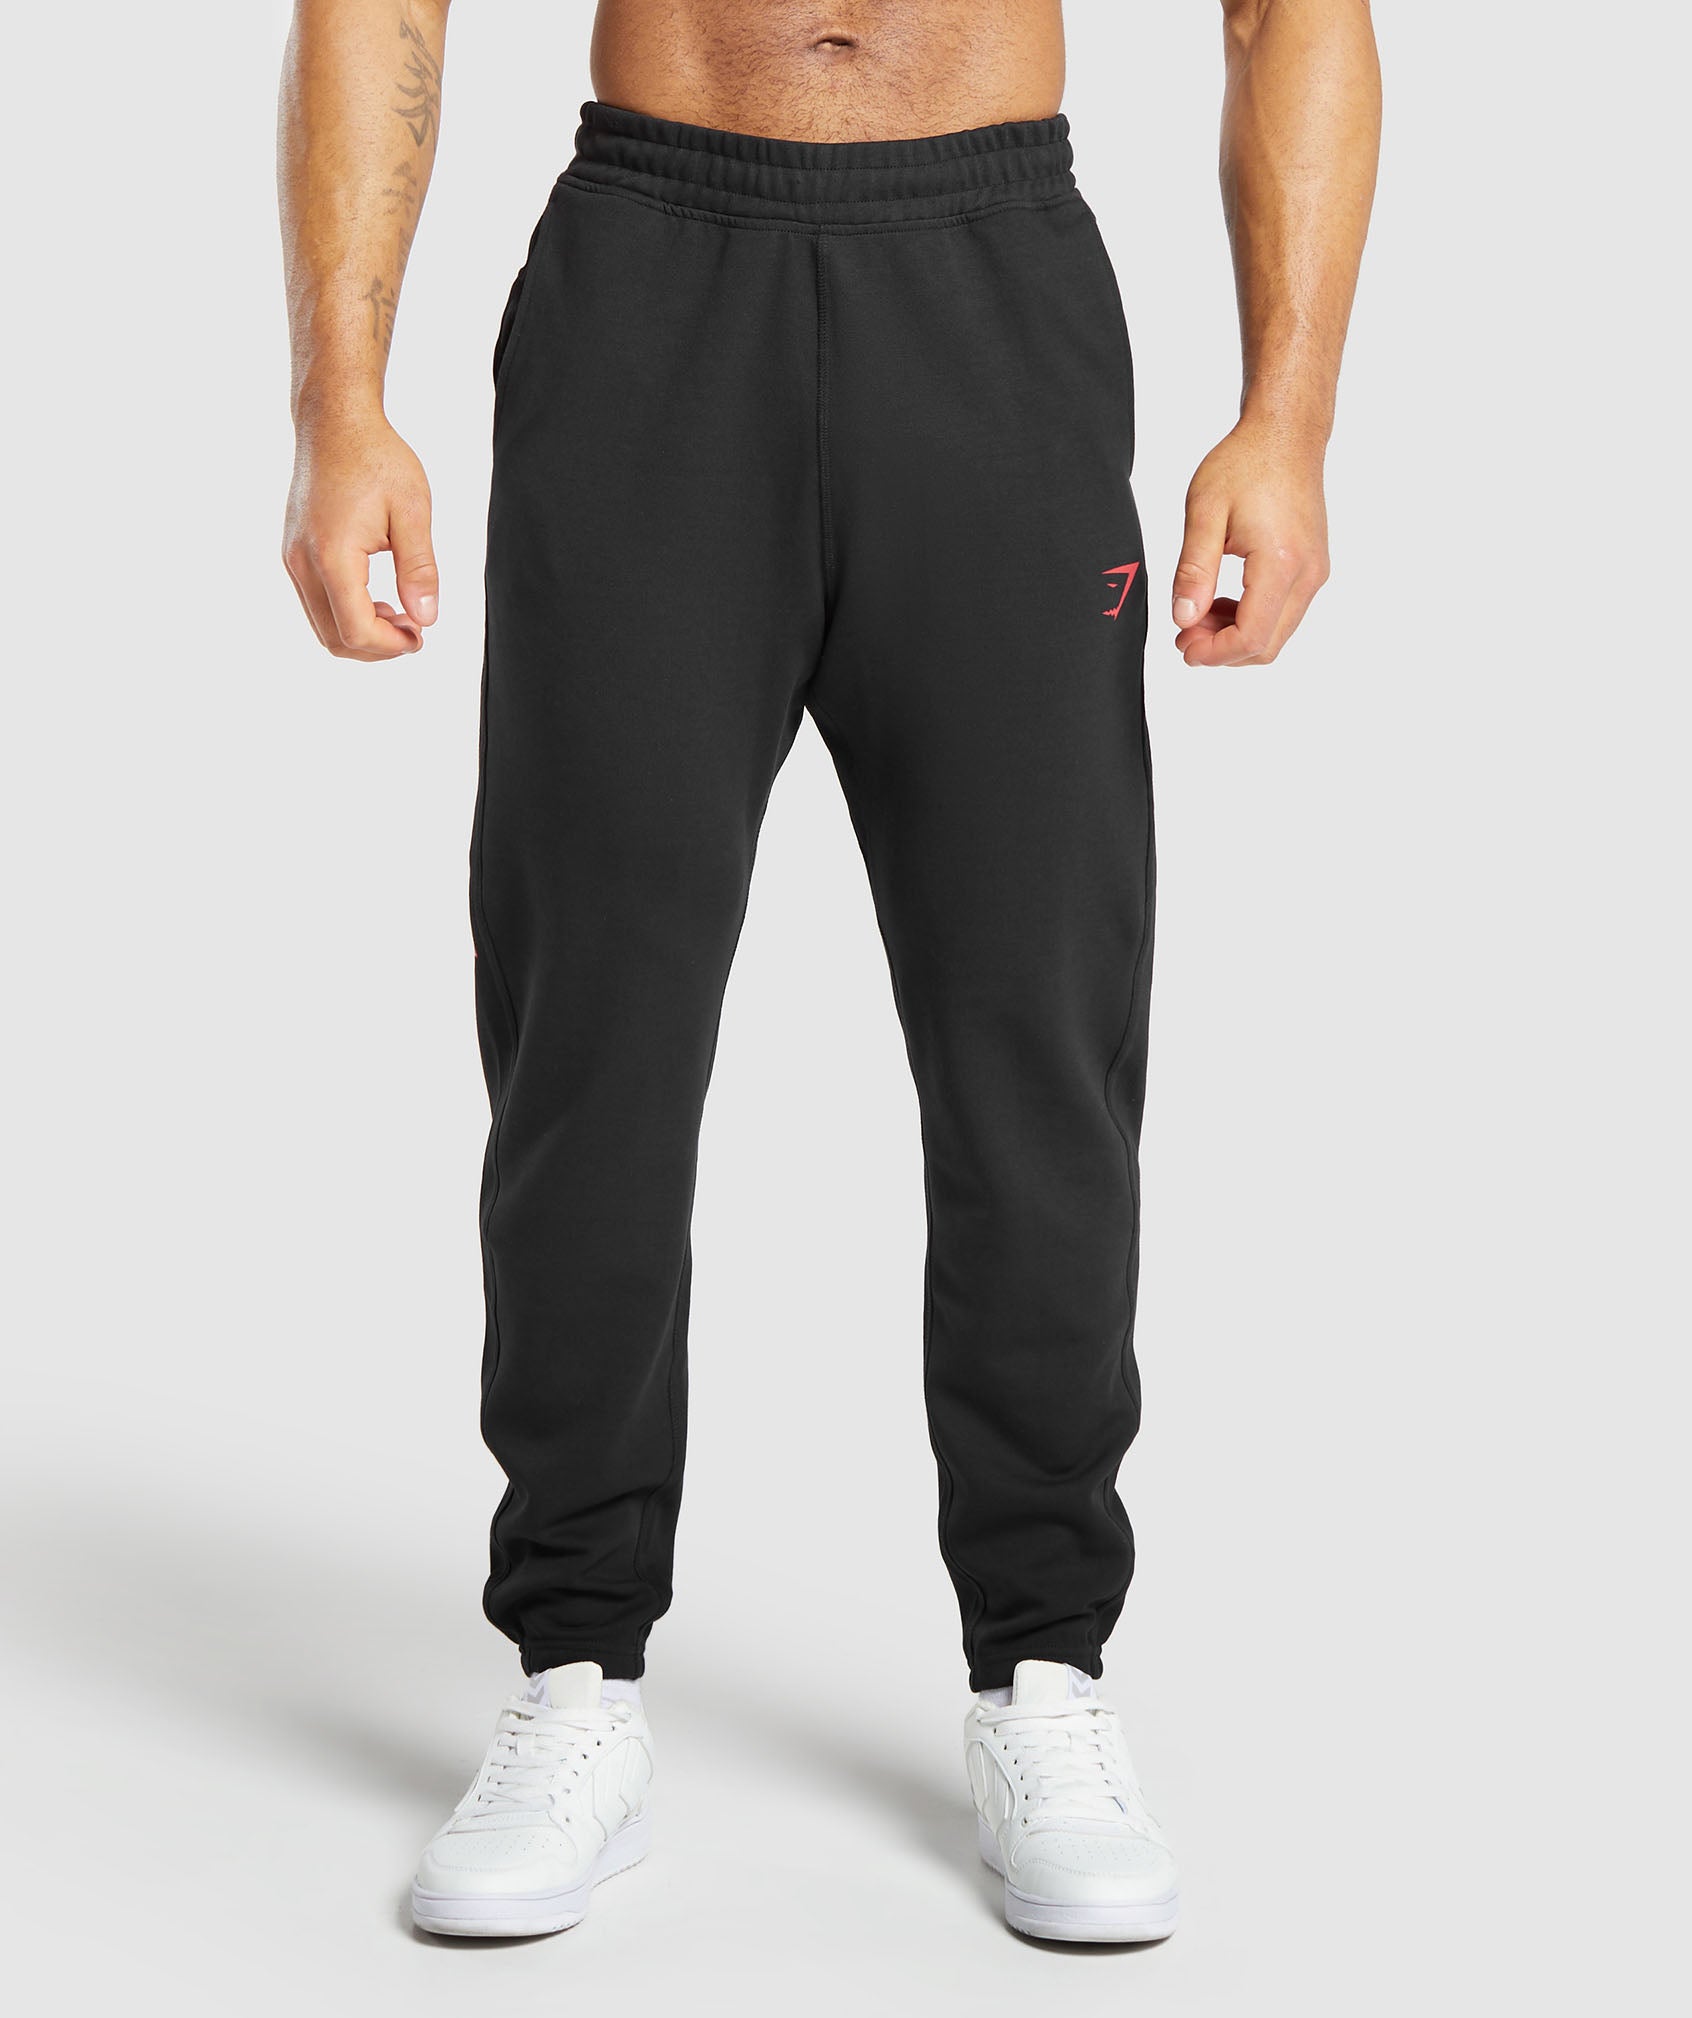 Impact Joggers in Black/Vivid Red - view 2